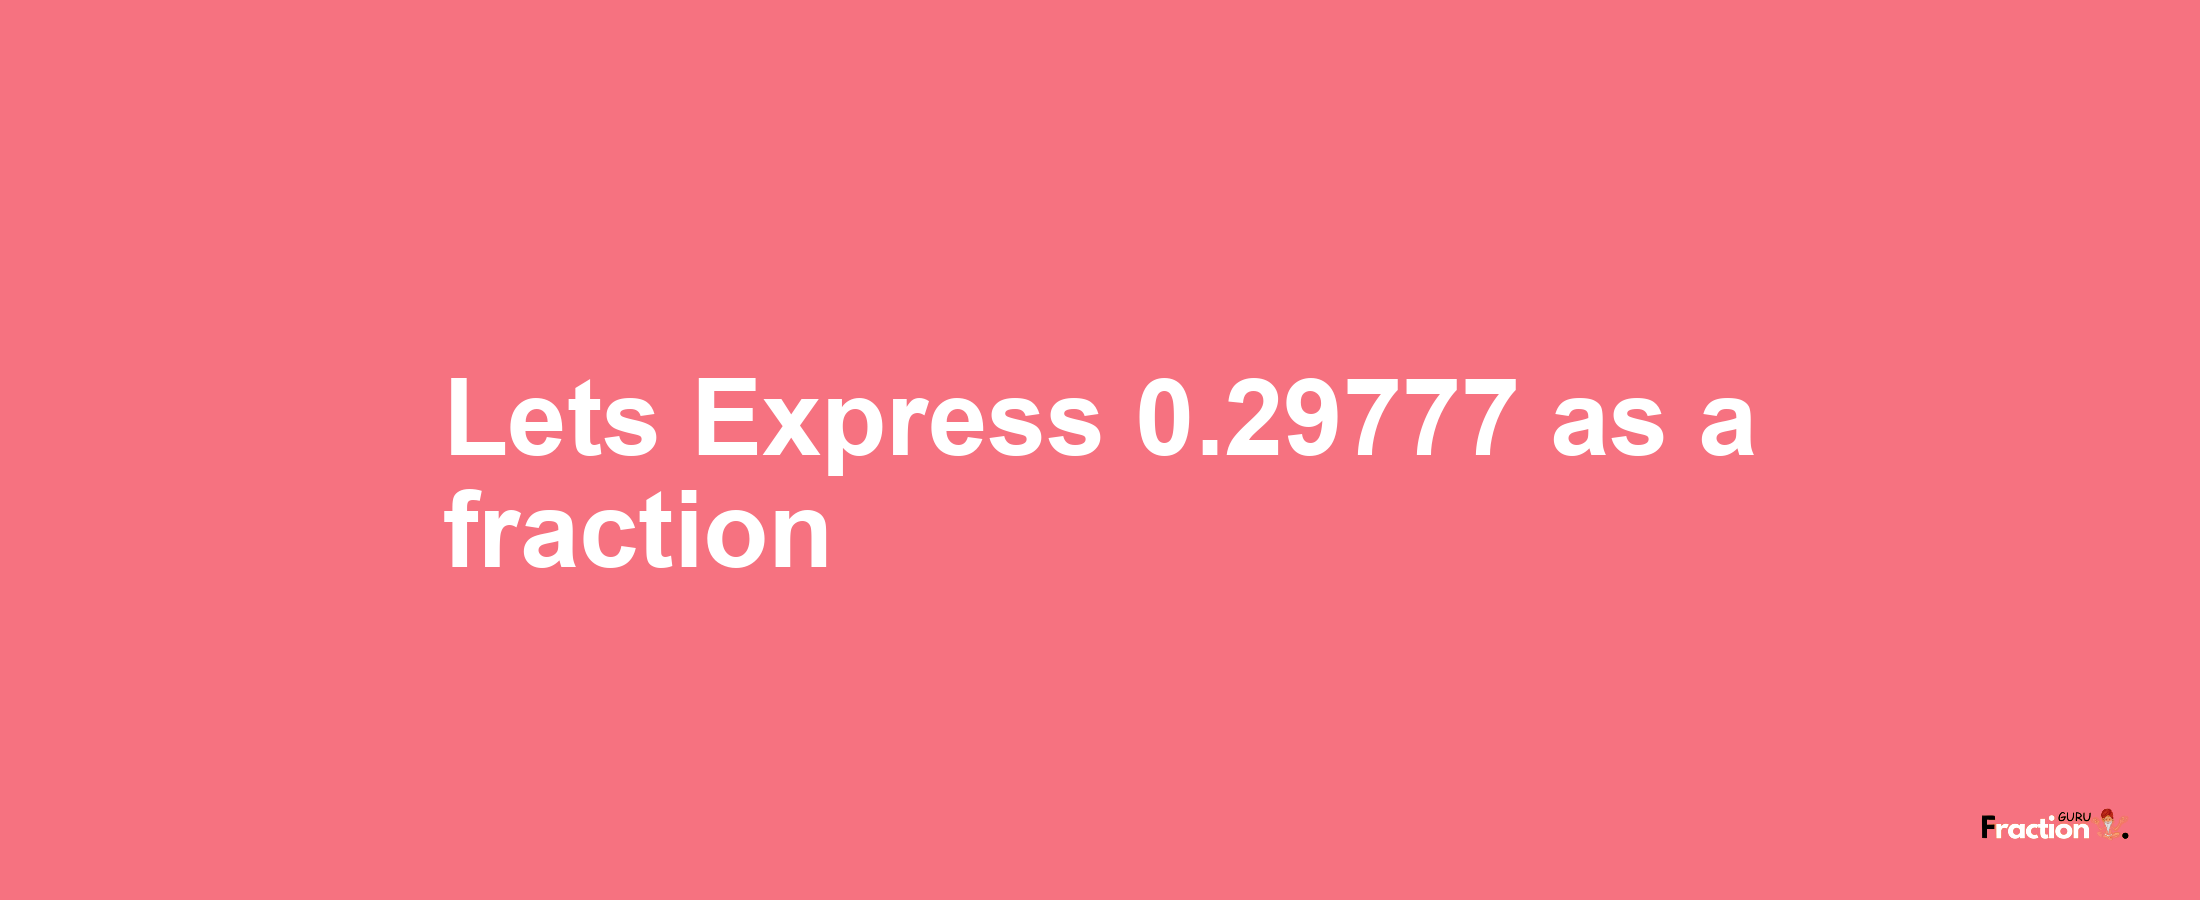 Lets Express 0.29777 as afraction